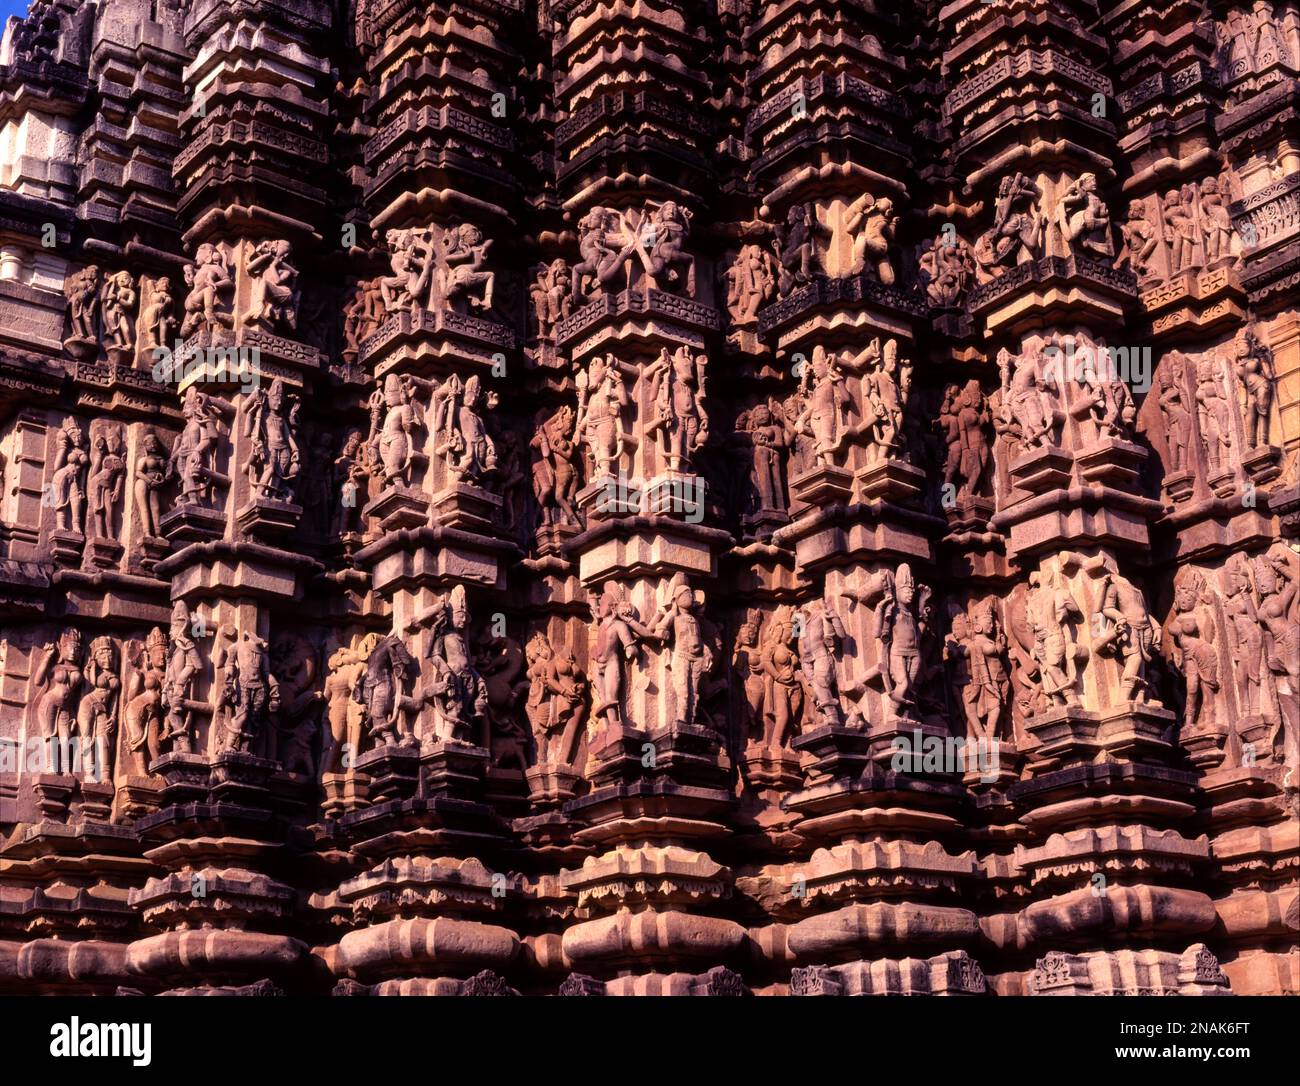 Sculptures on the exterior of the Duladeo temple walls in Khajuraho, Madhya Pradesh, India Stock Photo